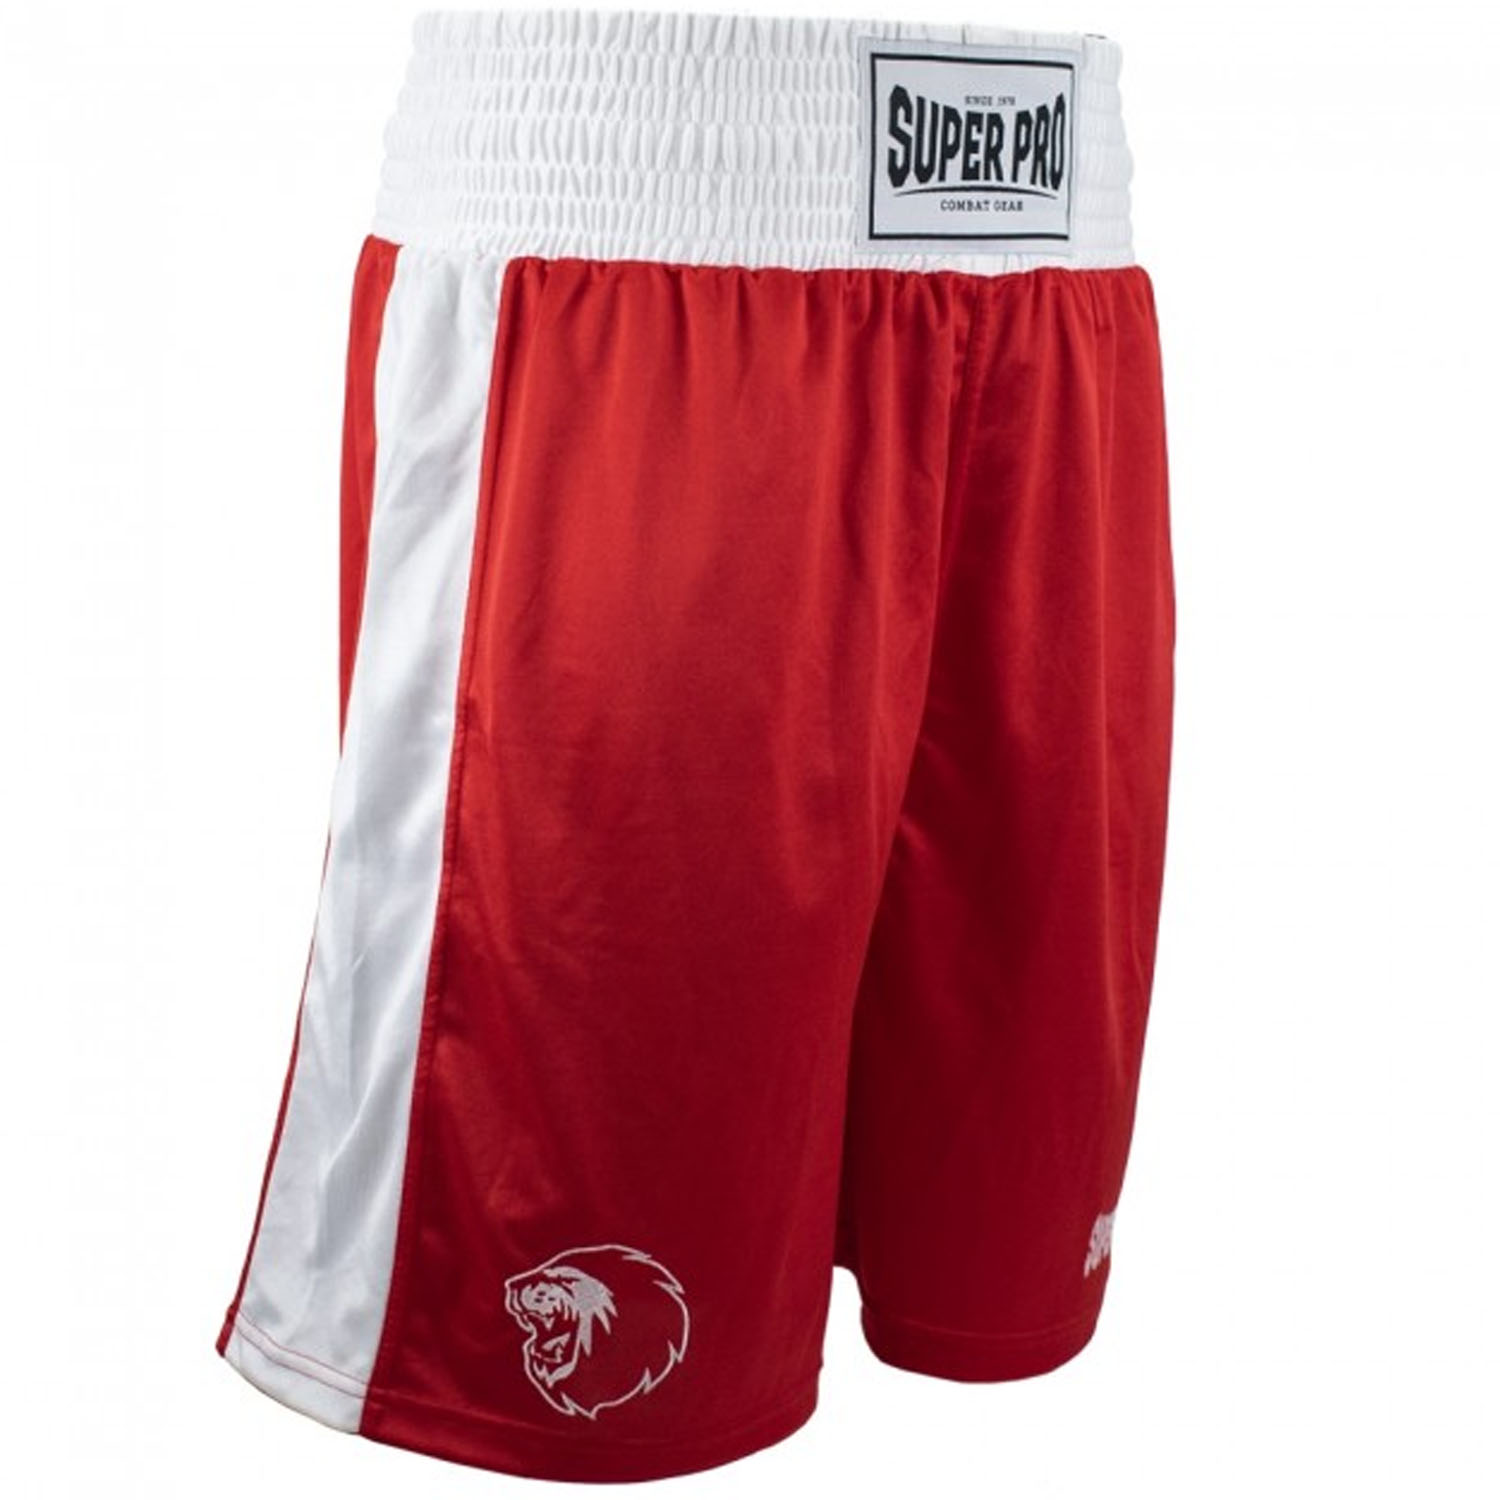 Super Pro Boxing Pants, Club, red-white, S